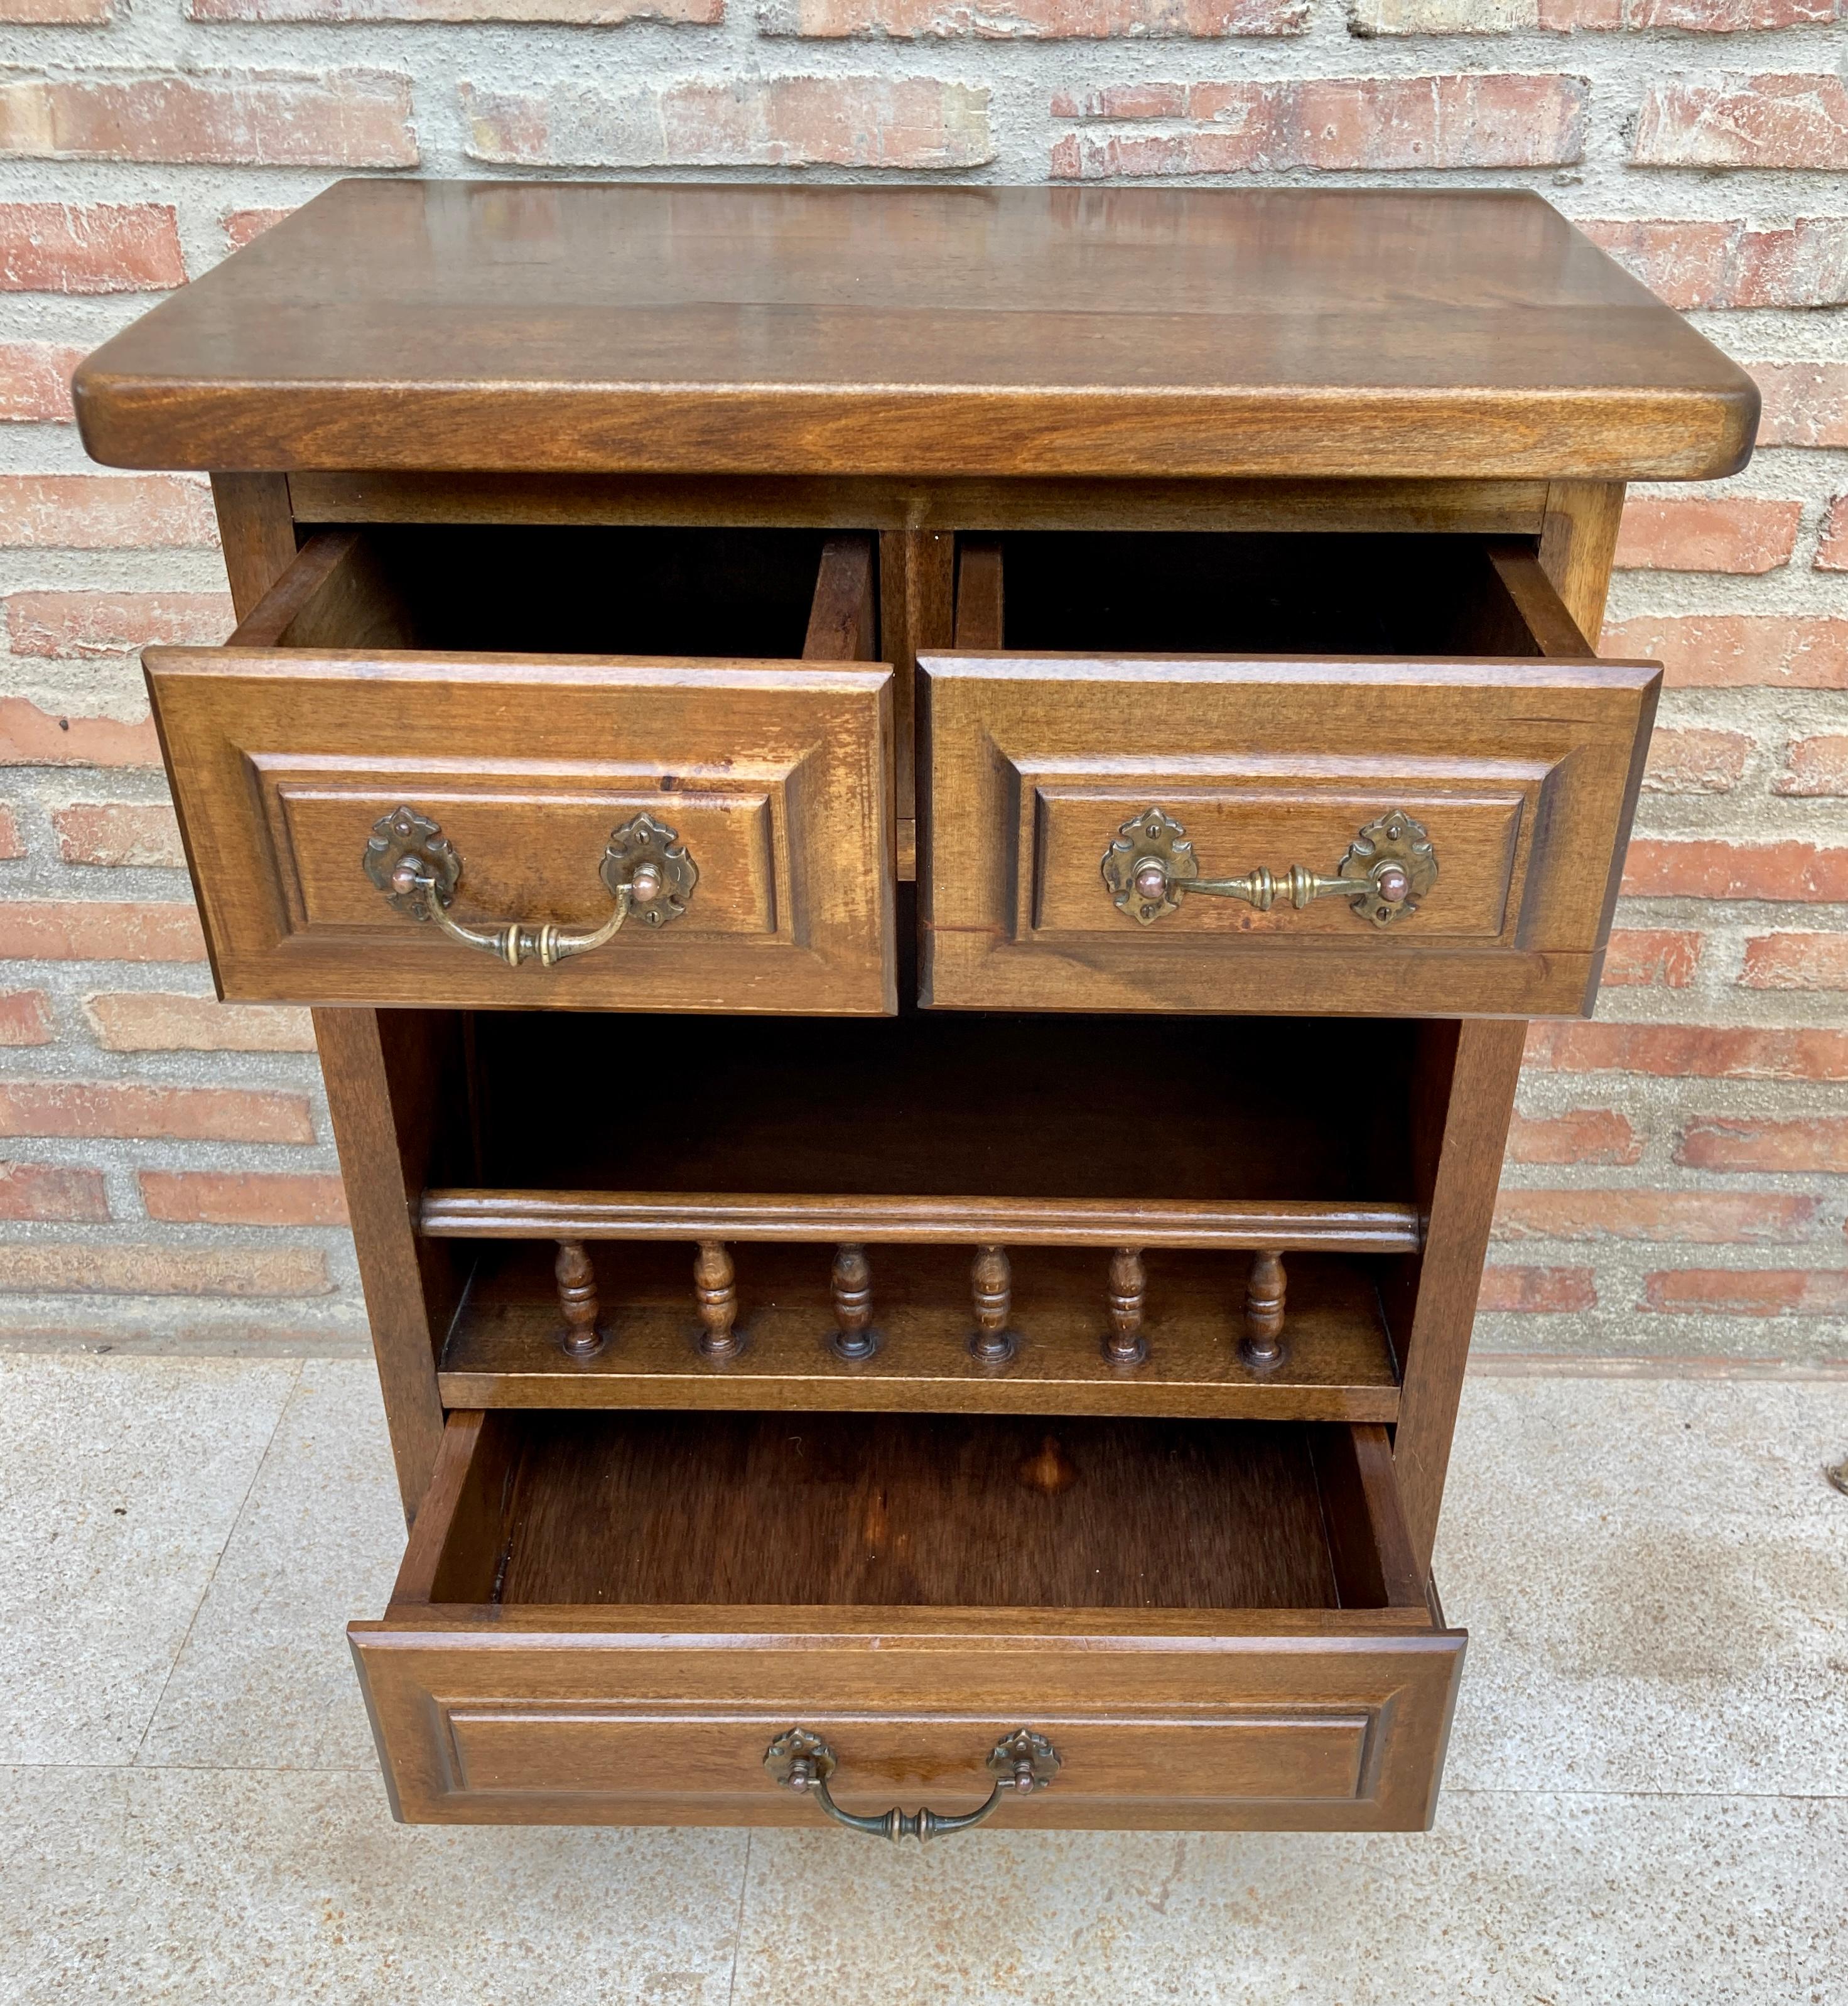 20th Century 20th Spanish Nightstands With Three Drawers One Shelf And Bronze Hardware 1970s, For Sale